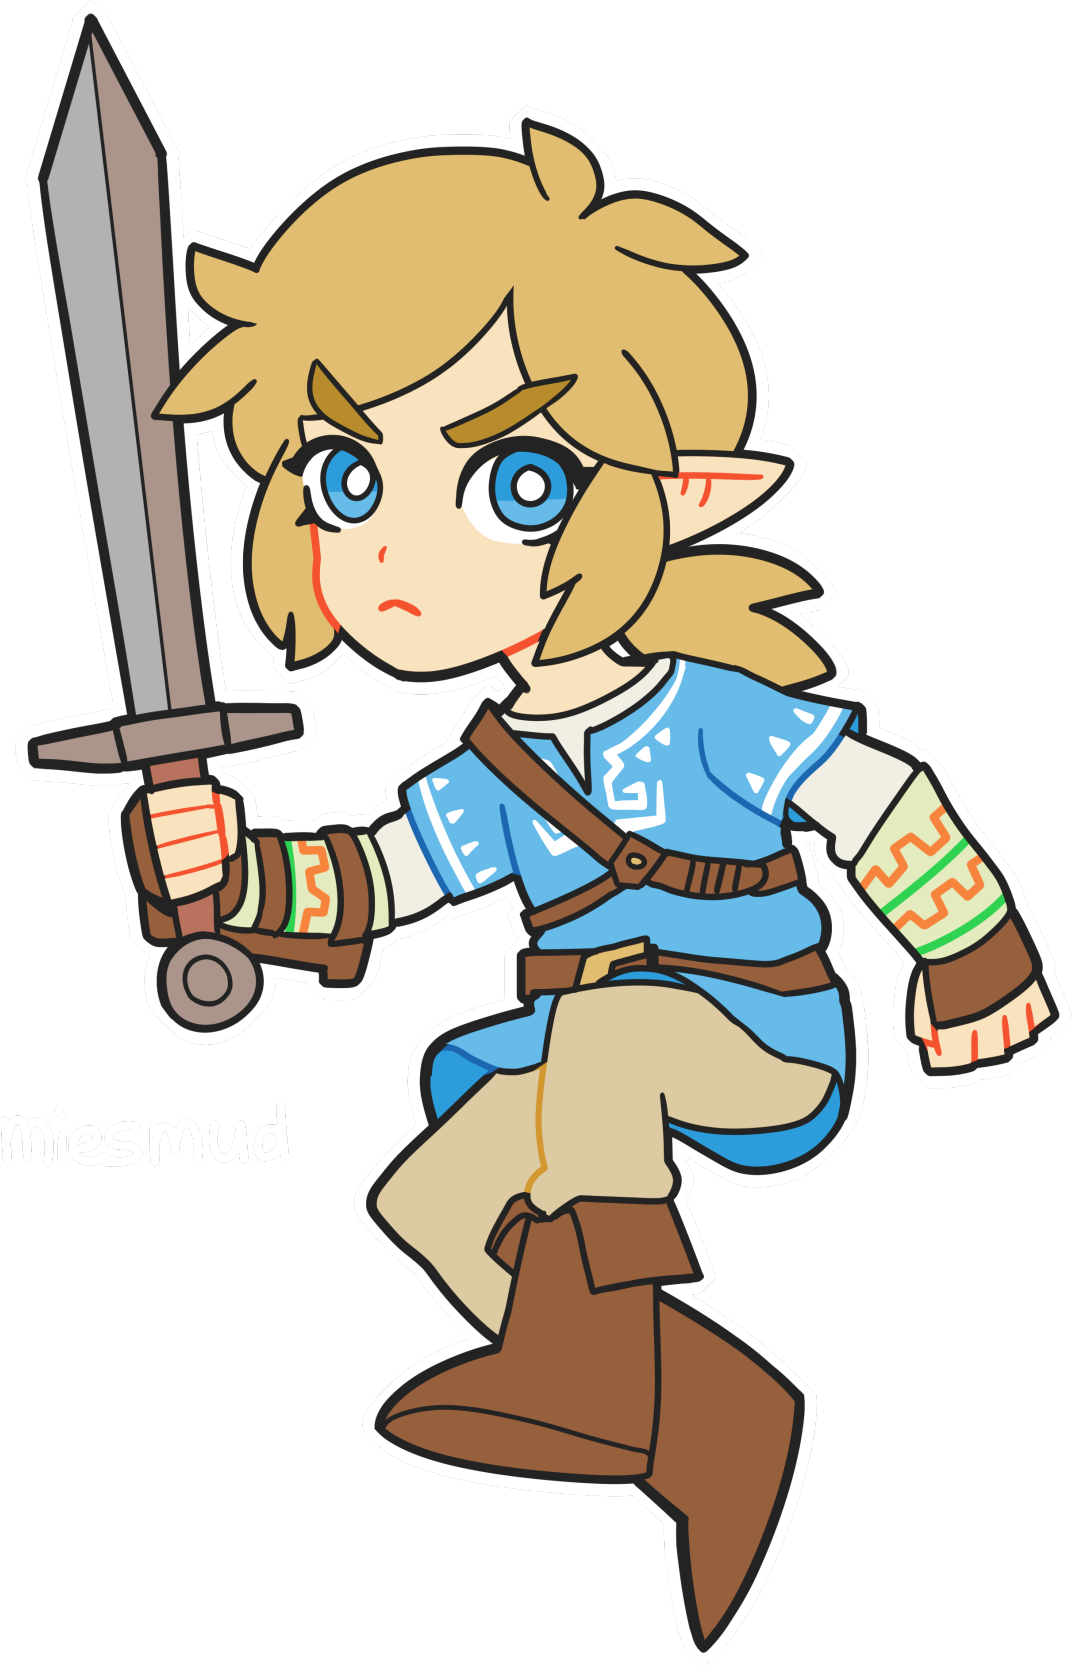 Chibi Link By Miesmud - Breath Of The Wild Link Chibi (1280x1810)